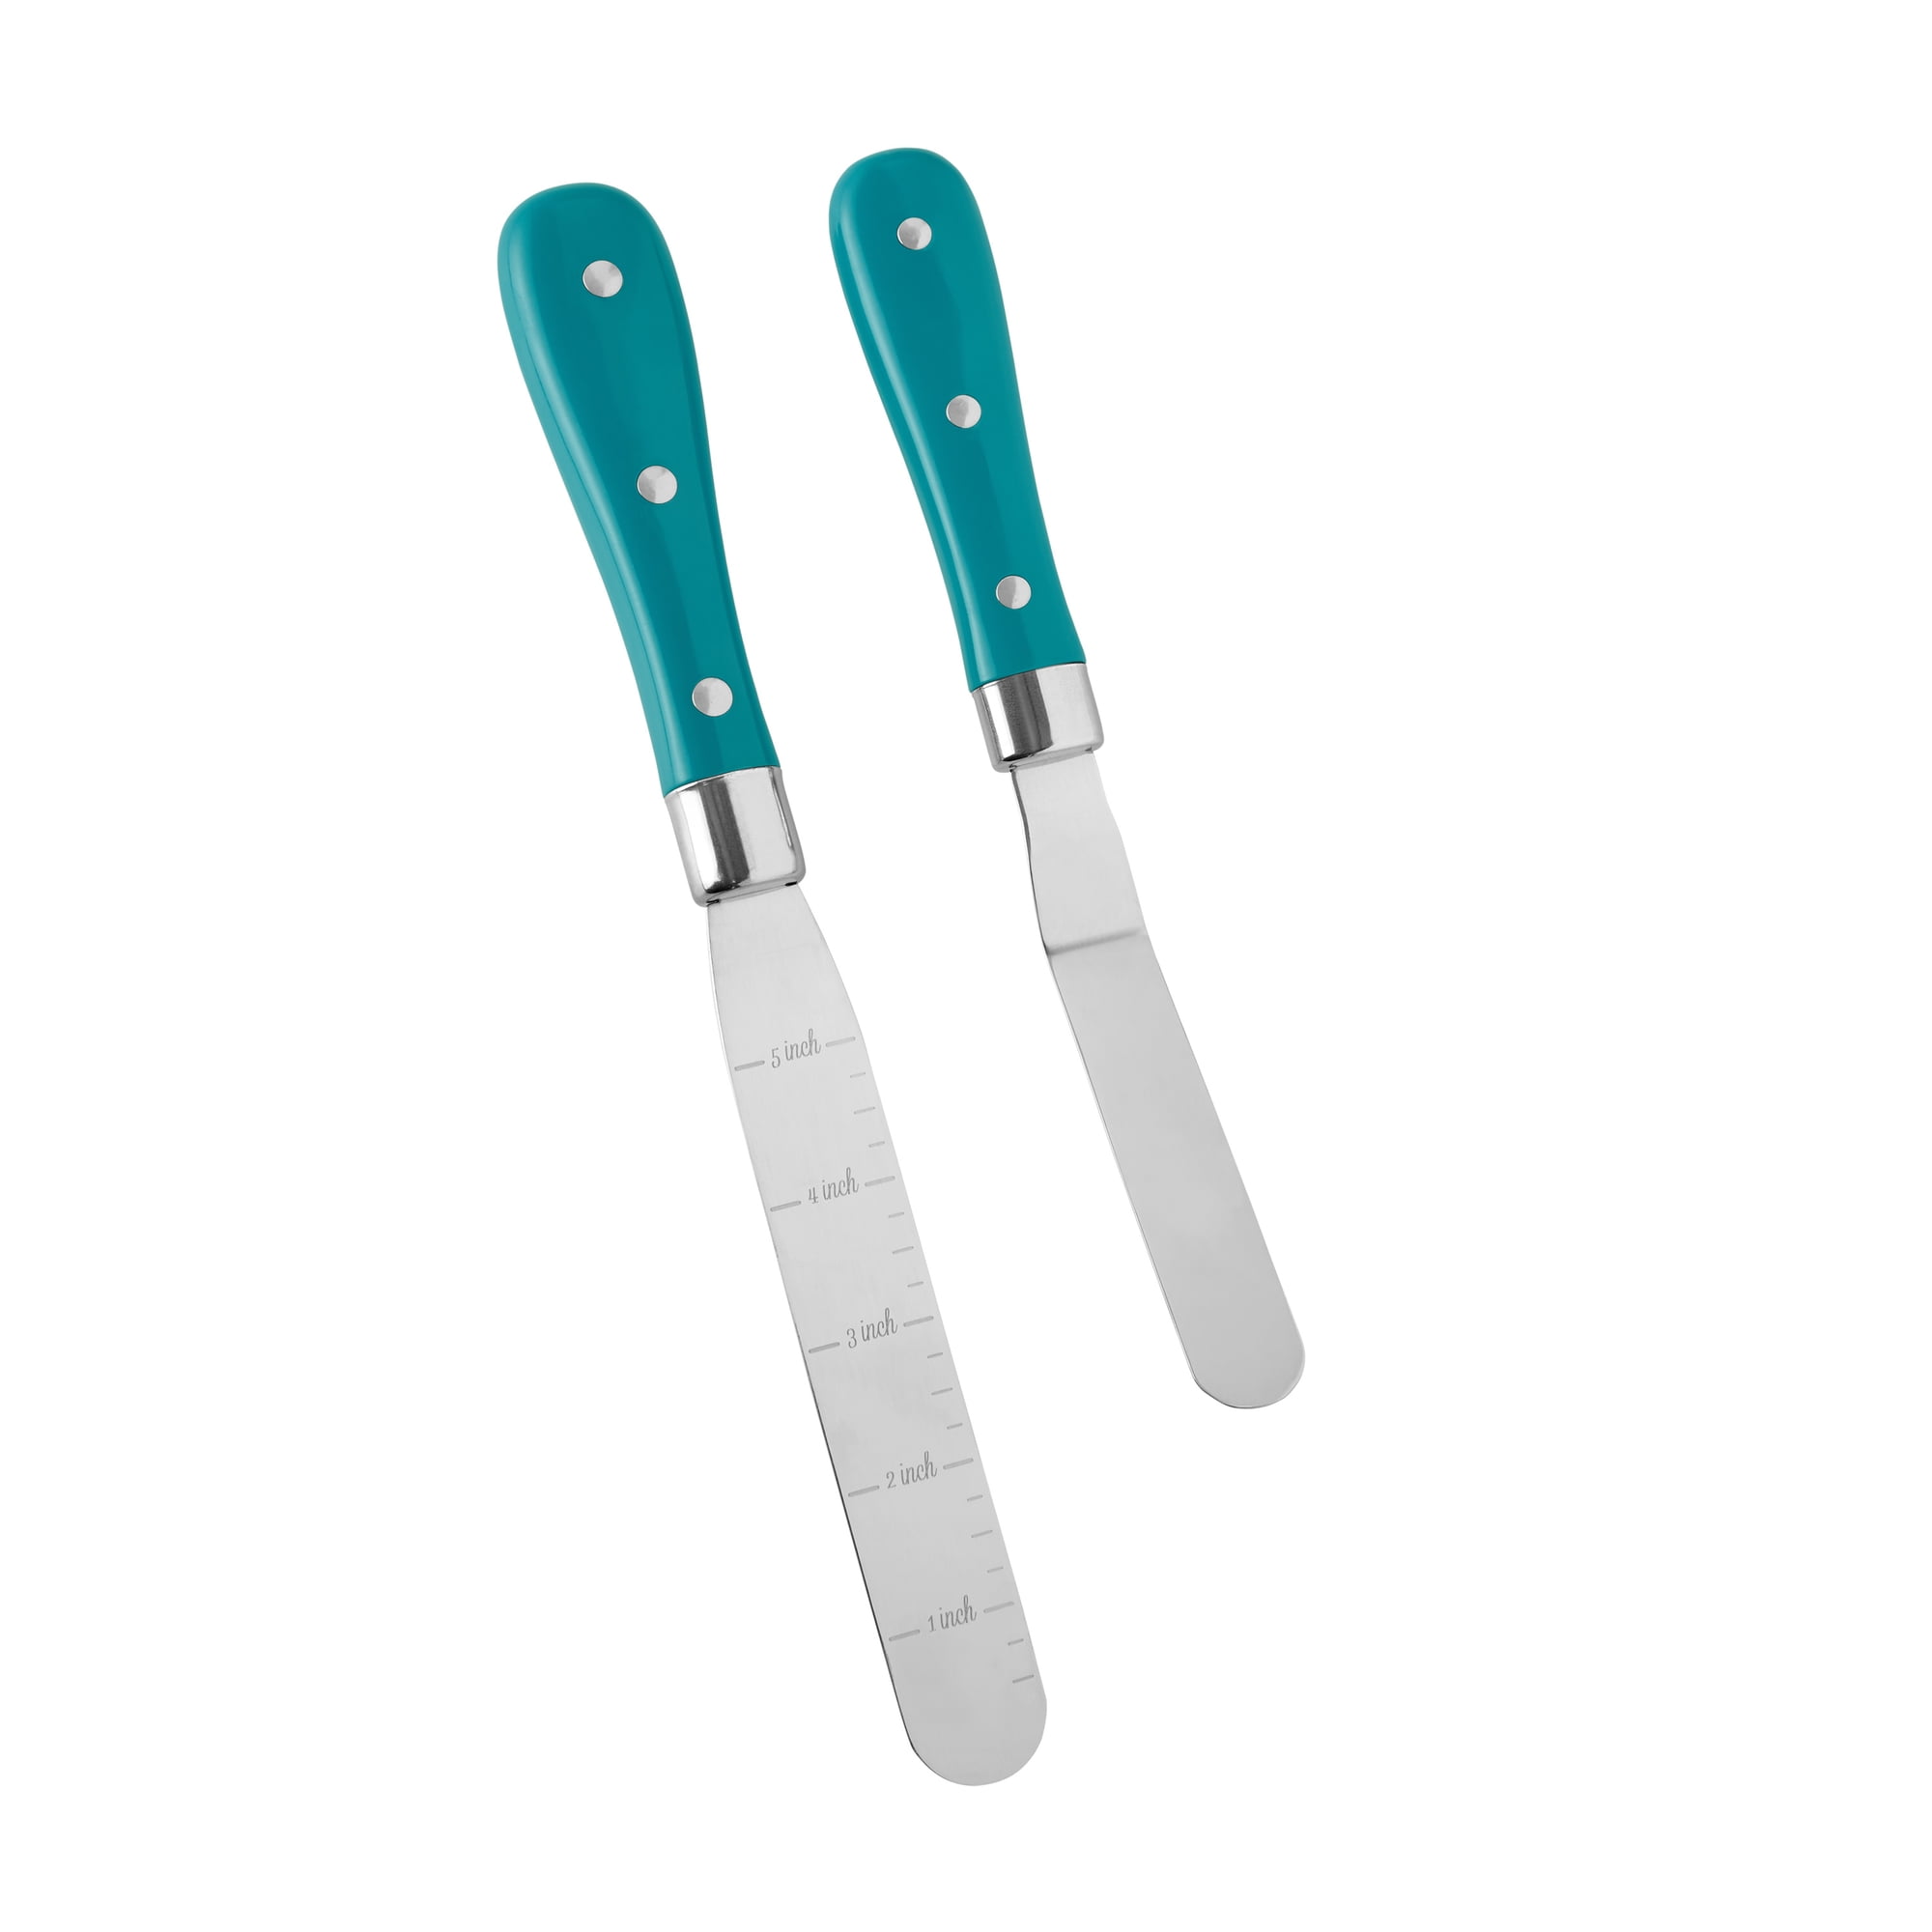 The Pioneer Woman 2-Piece Stainless Steel Butter and Icing Spreaders Set, Silver/Teal